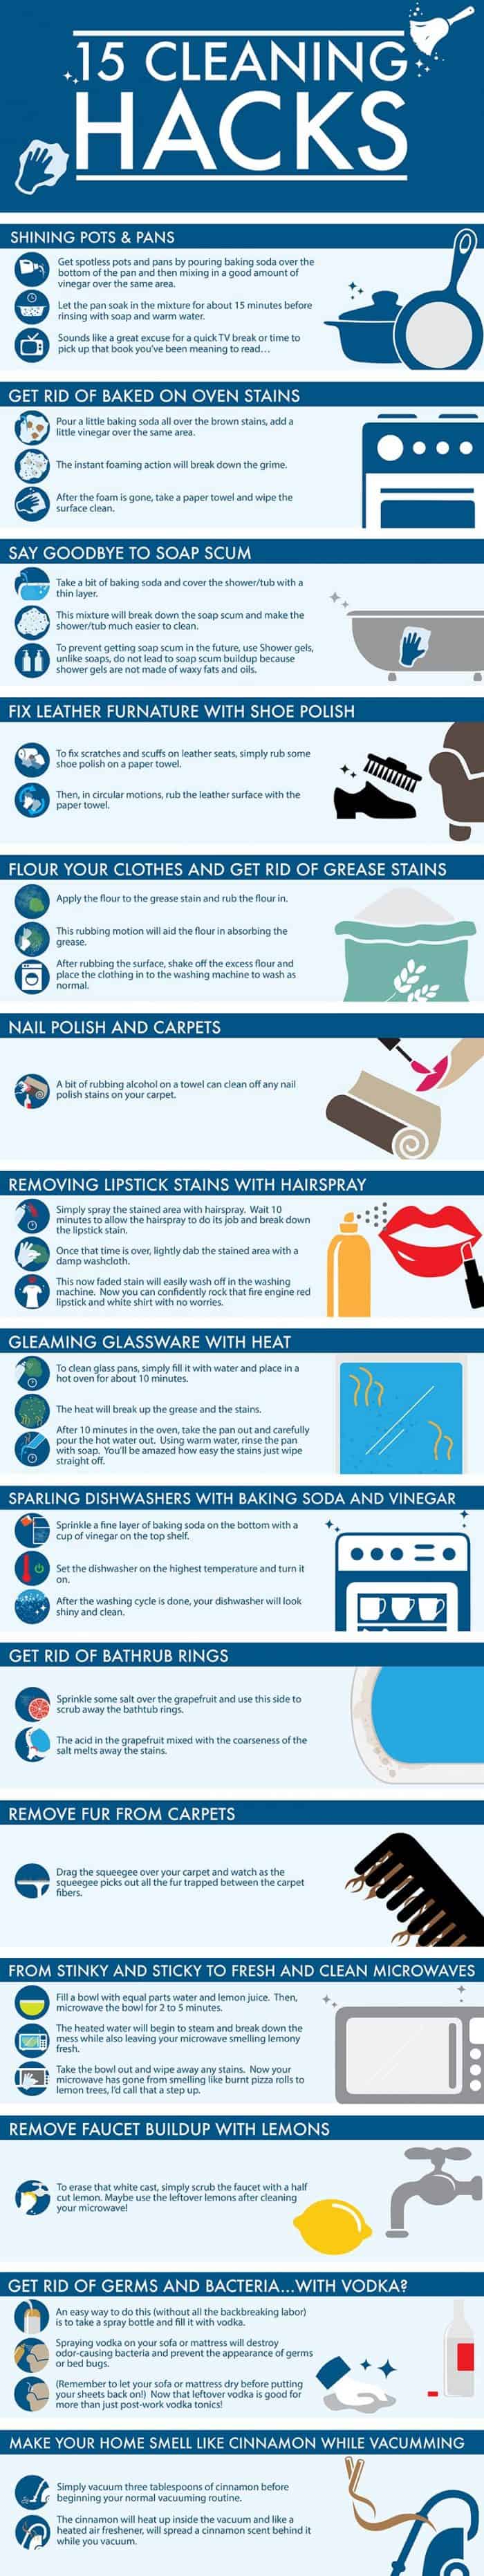 15 Cleaning Hacks Infographic